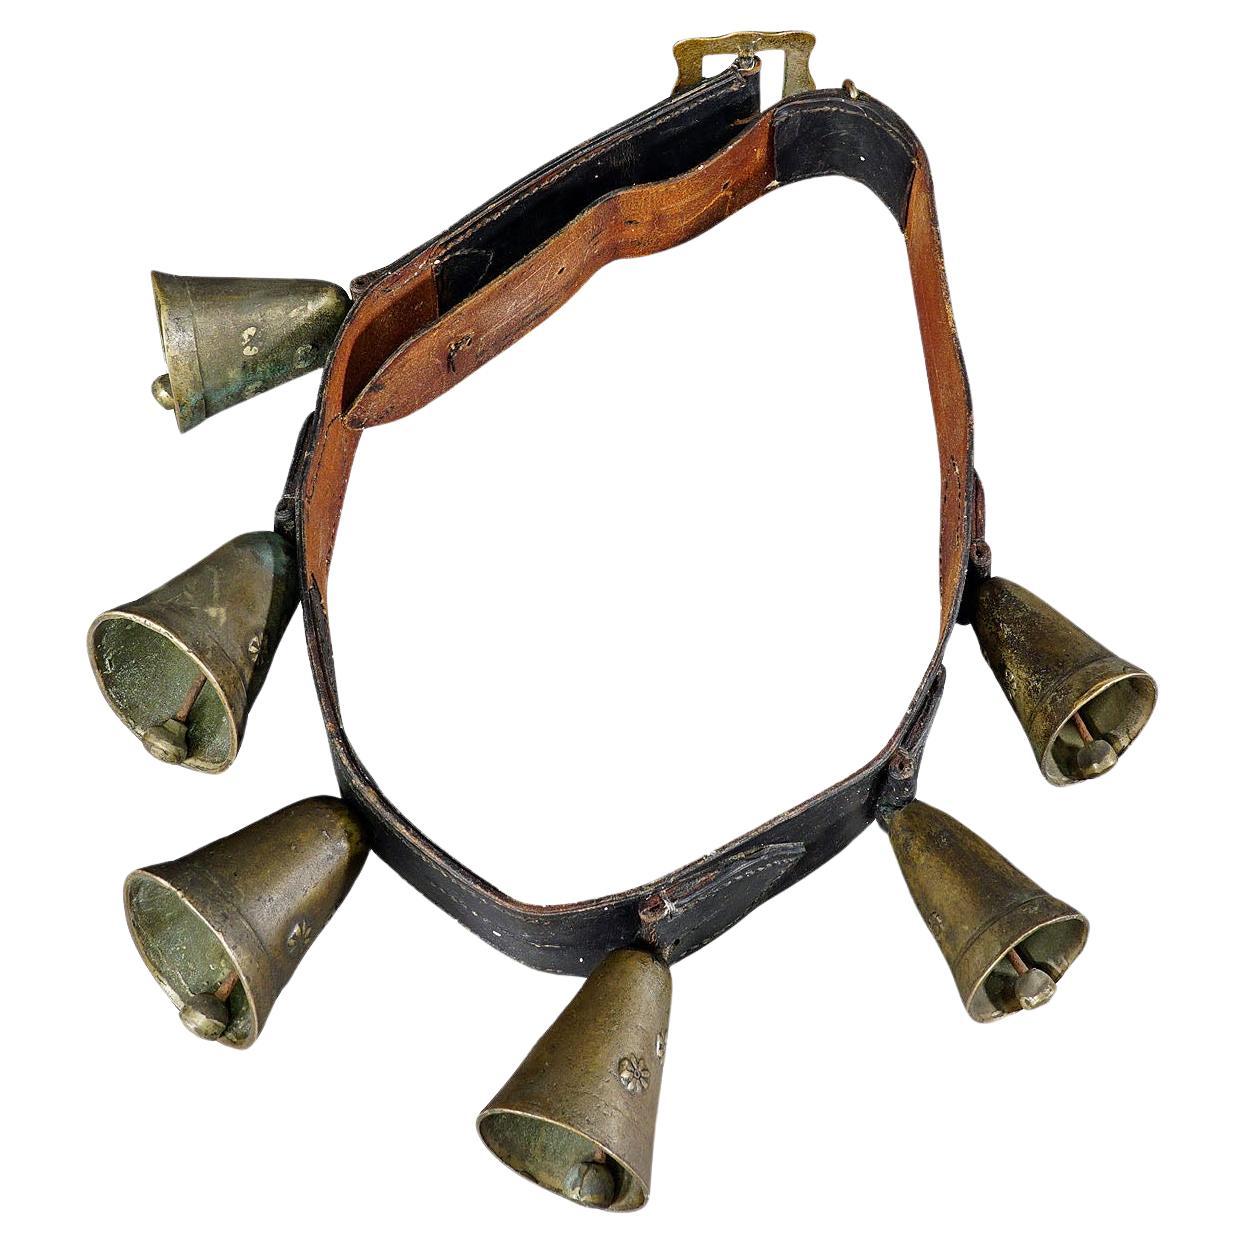 Antique Leather Strap with Six Casted Cattle Bells, Switzerland ca. 1900s